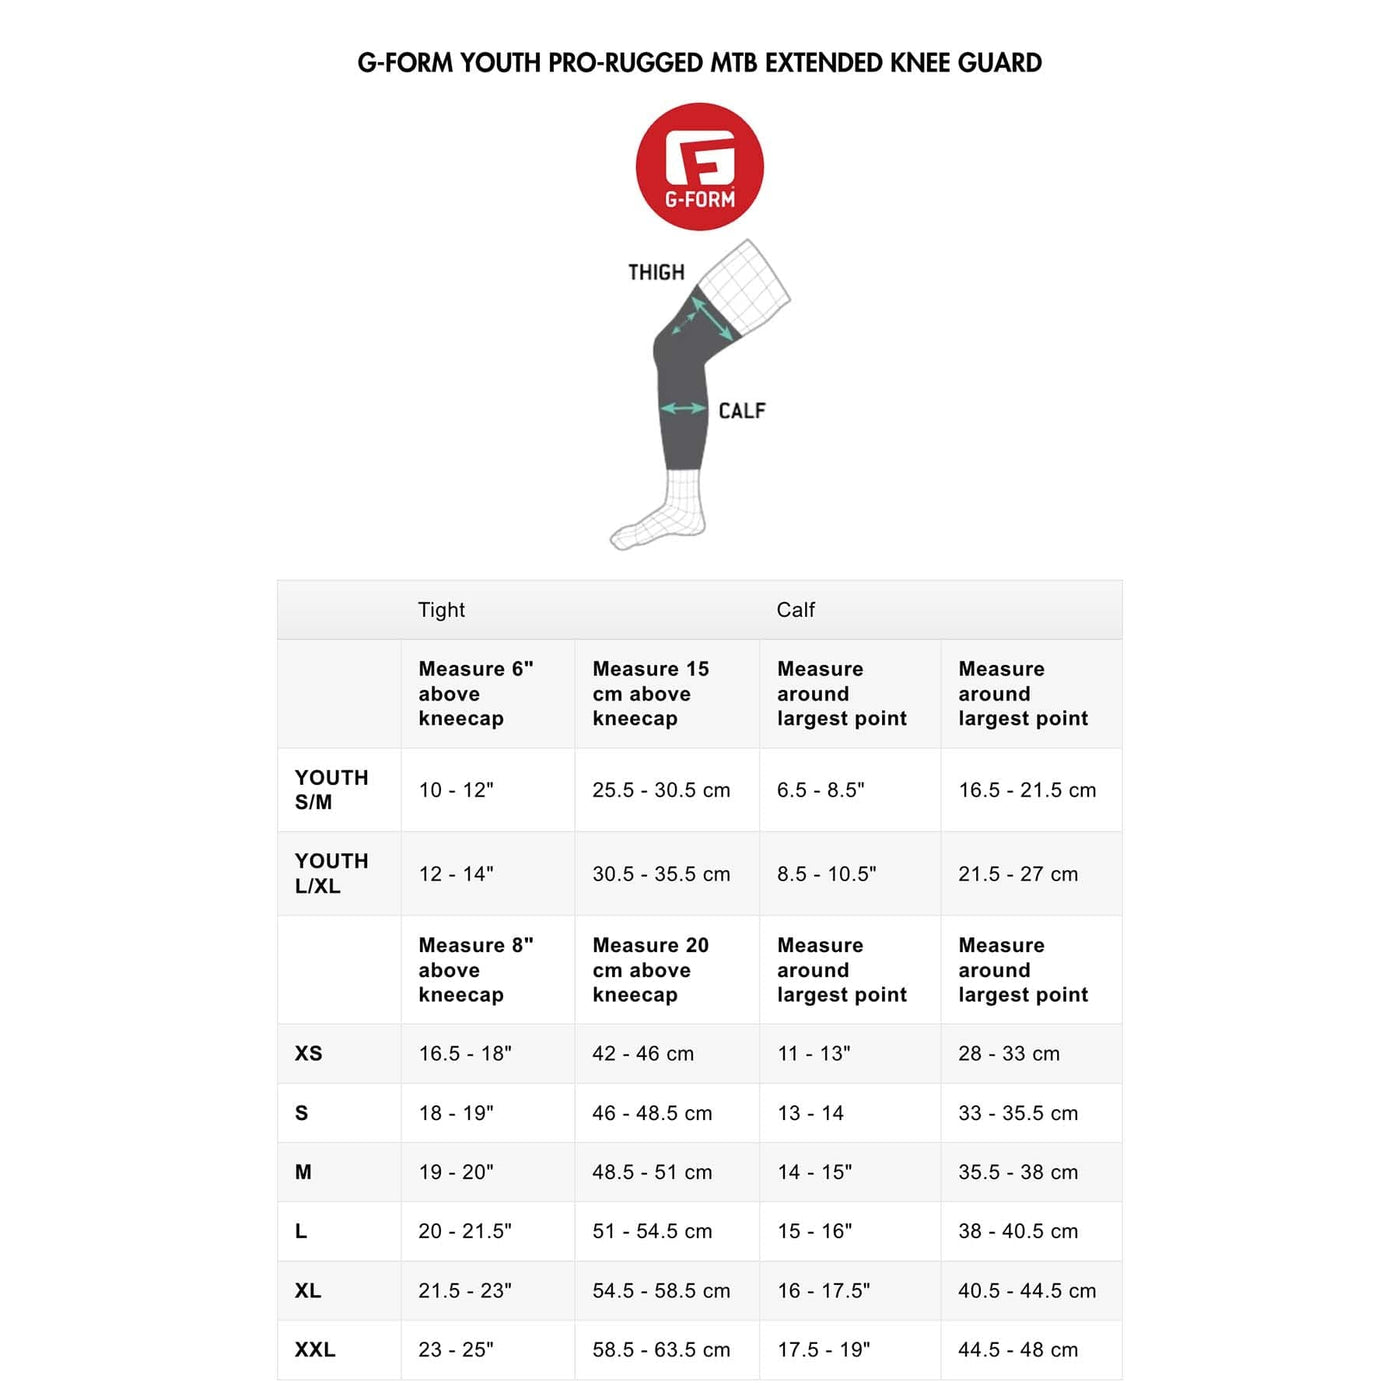 G-FORM PRO-RUGGED MTB EXTENDED KNEE GUARD SIZE CHART SIZE CHART